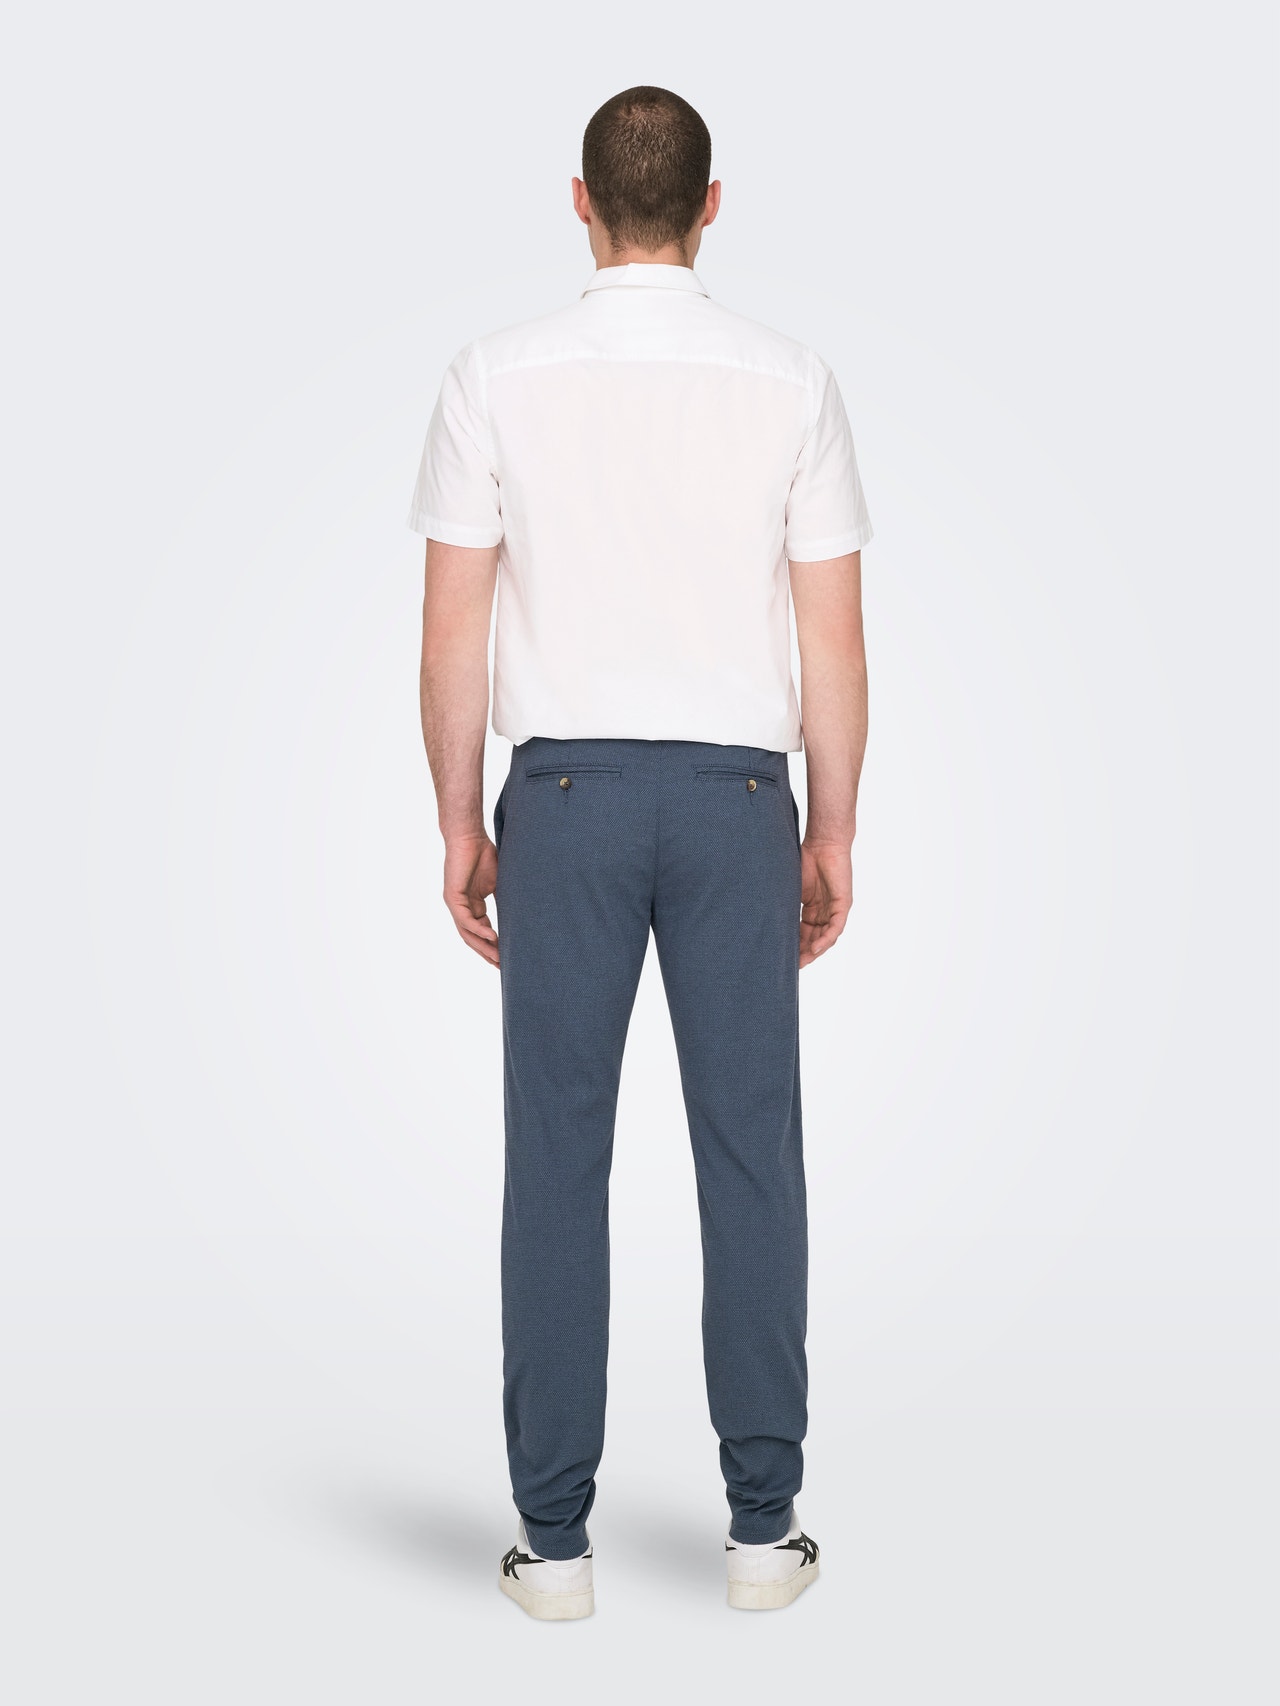 ONLY & SONS Slim Fit Hose -Bering Sea - 22028132